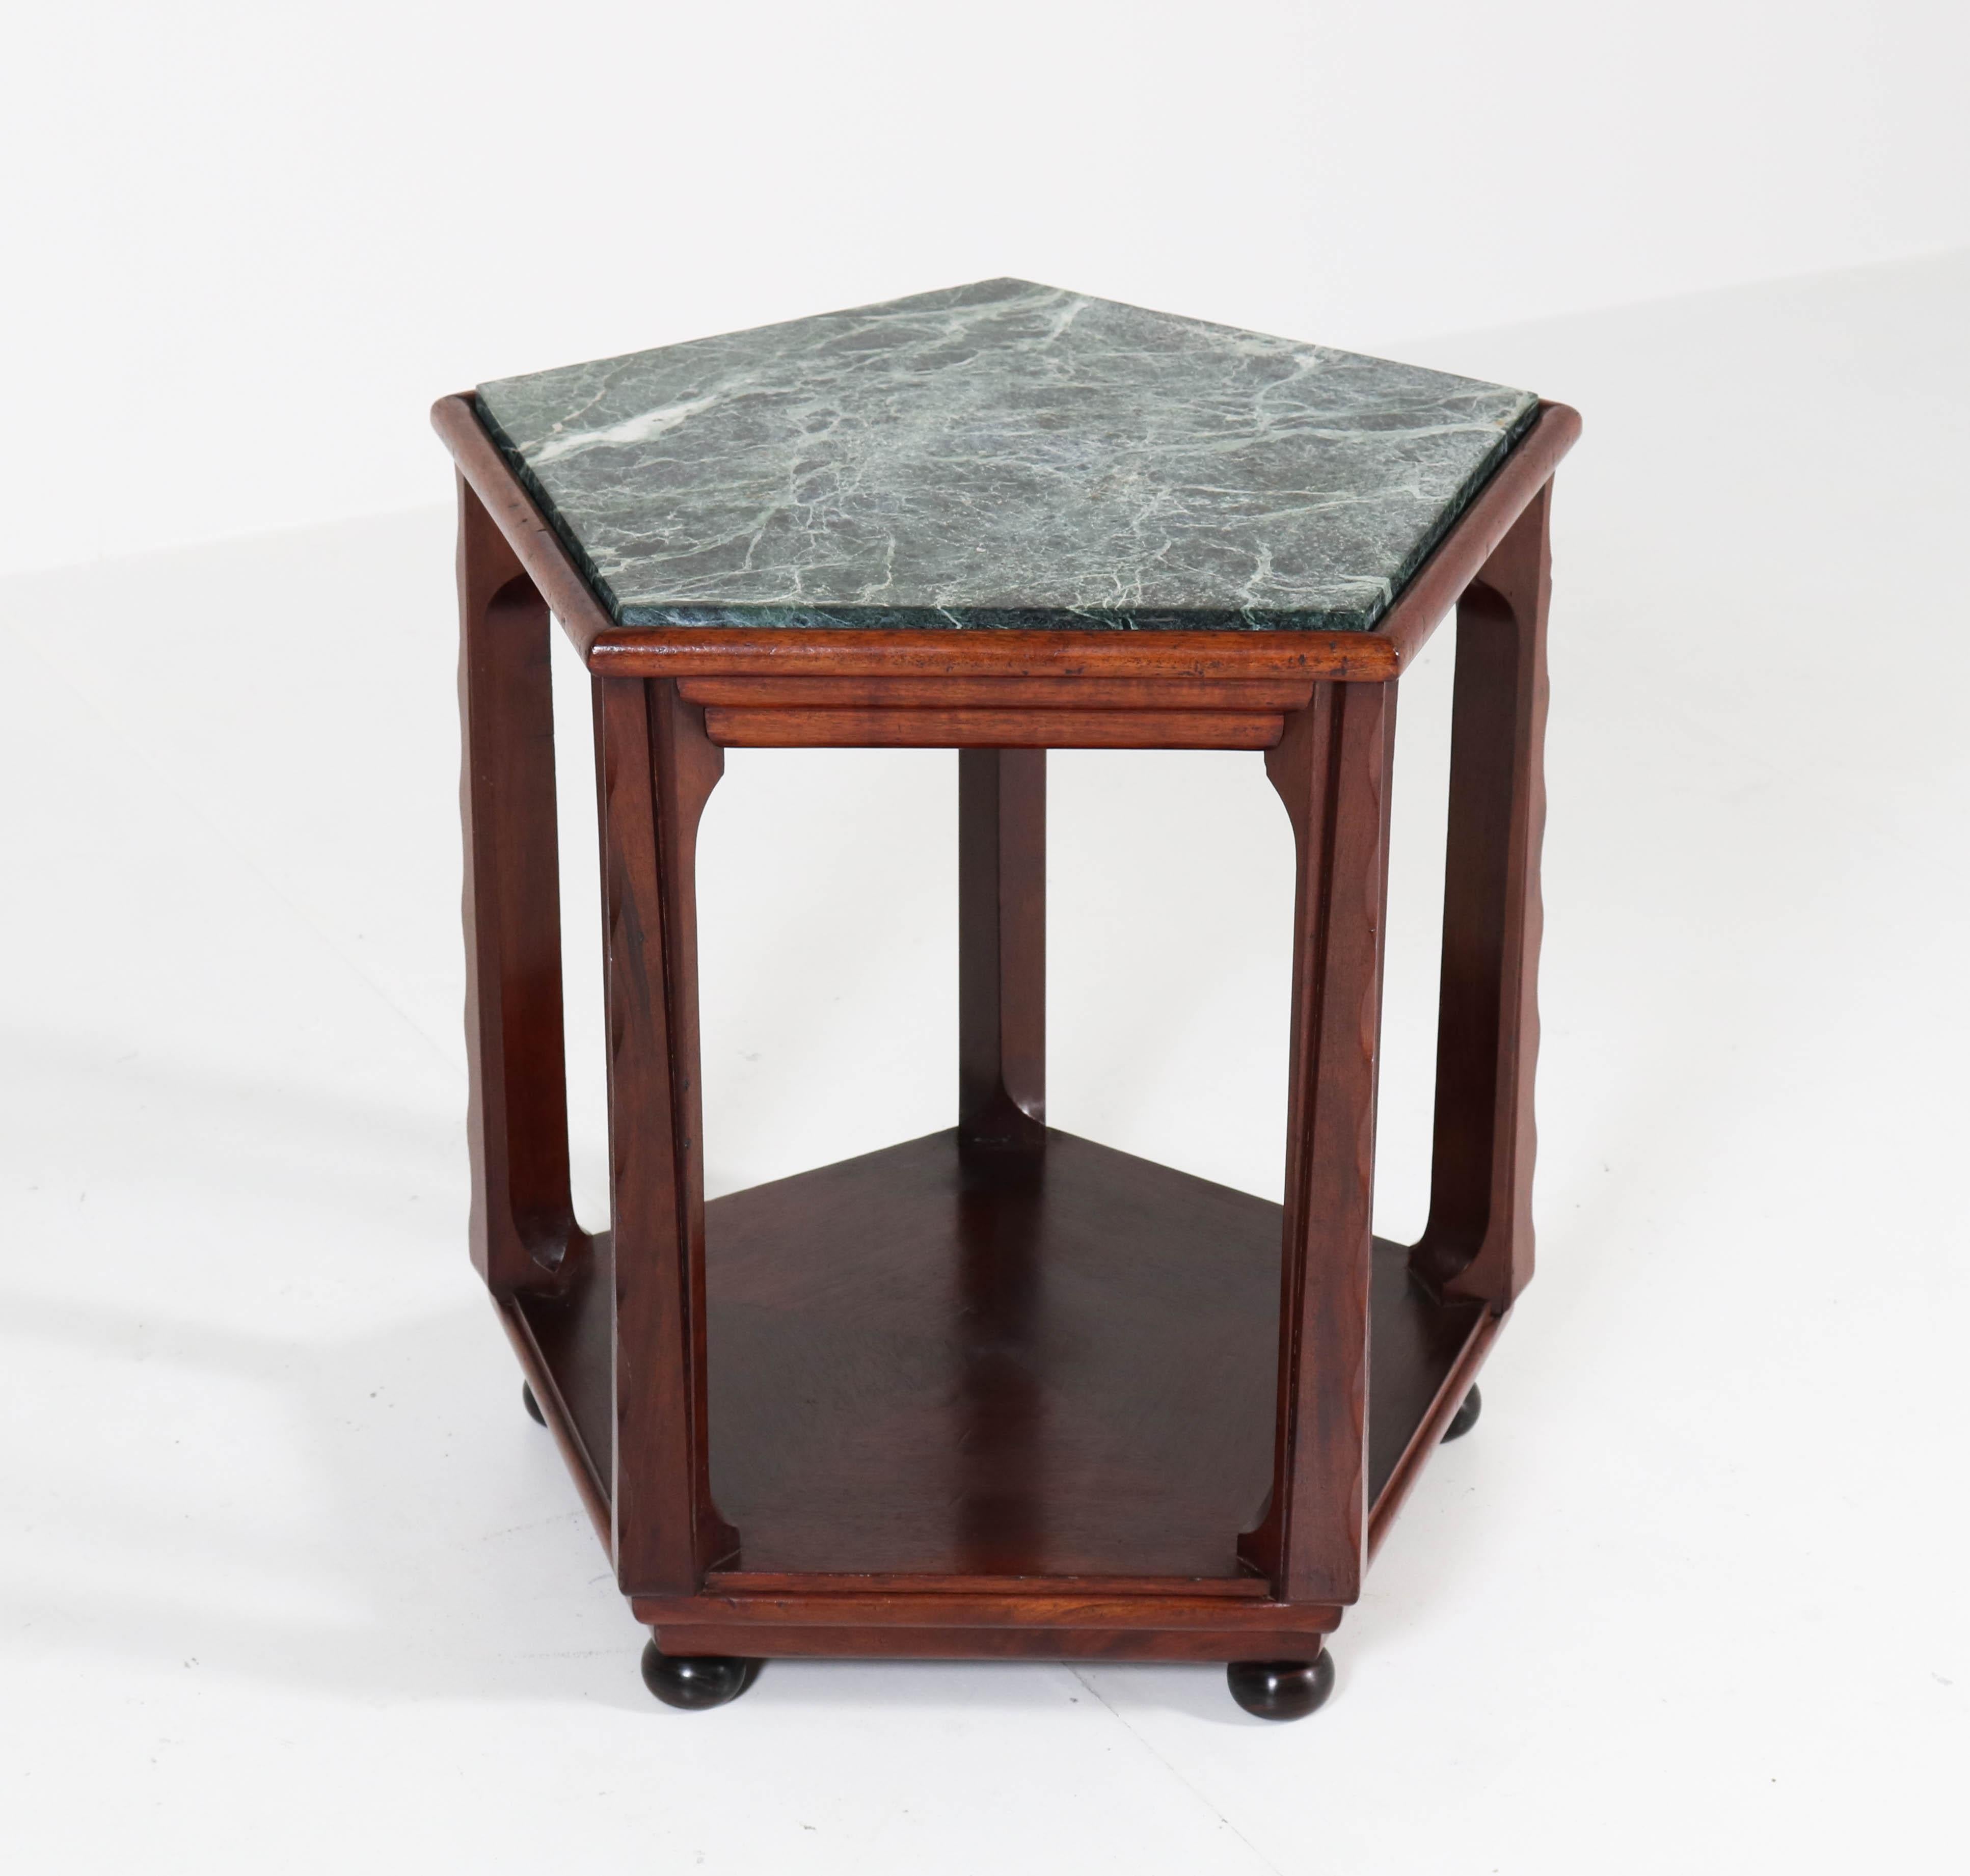 Early 20th Century Art Deco Amsterdam School Coffee Table by Max Coini, 1920s